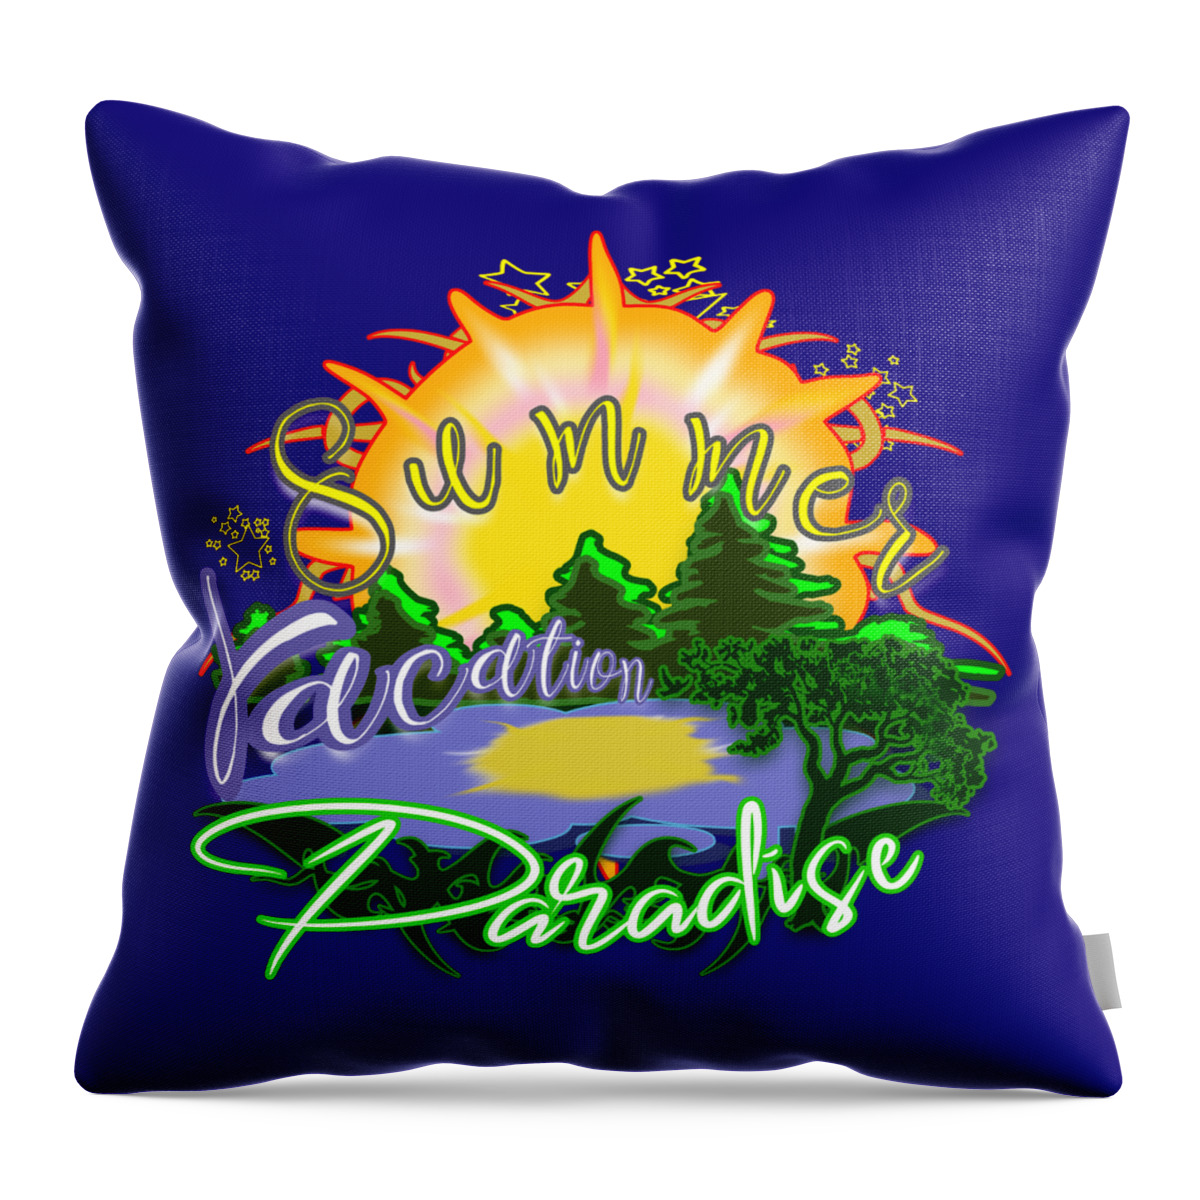 Summer Throw Pillow featuring the digital art Summer Vacation Paradise by Delynn Addams